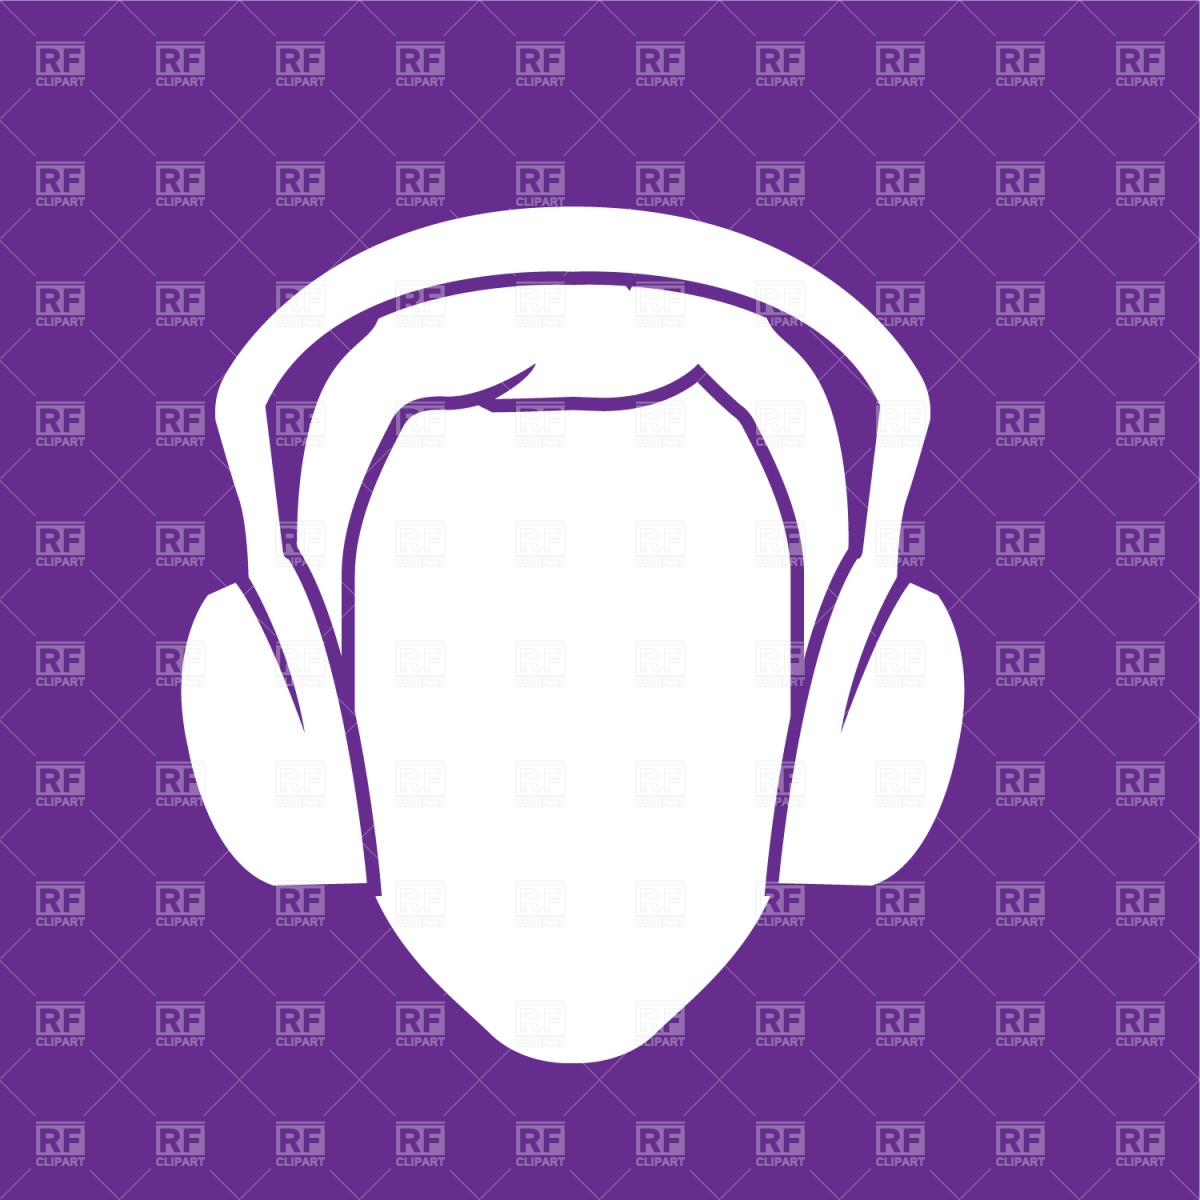 Dj With Headphones Icon 1494 Download Royalty Free Vector Clipart